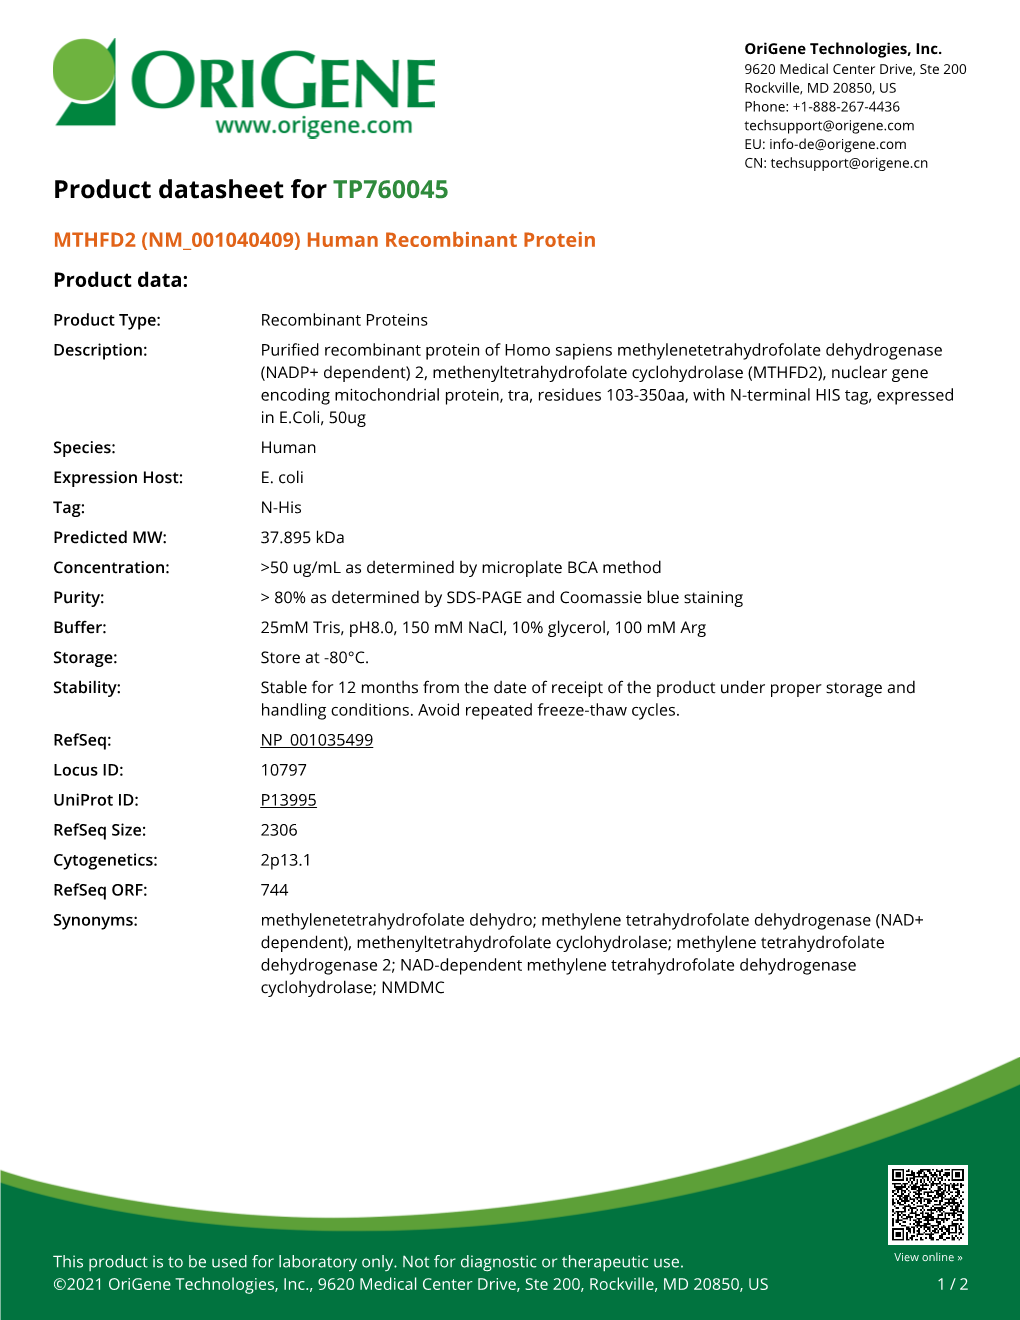 MTHFD2 (NM 001040409) Human Recombinant Protein Product Data